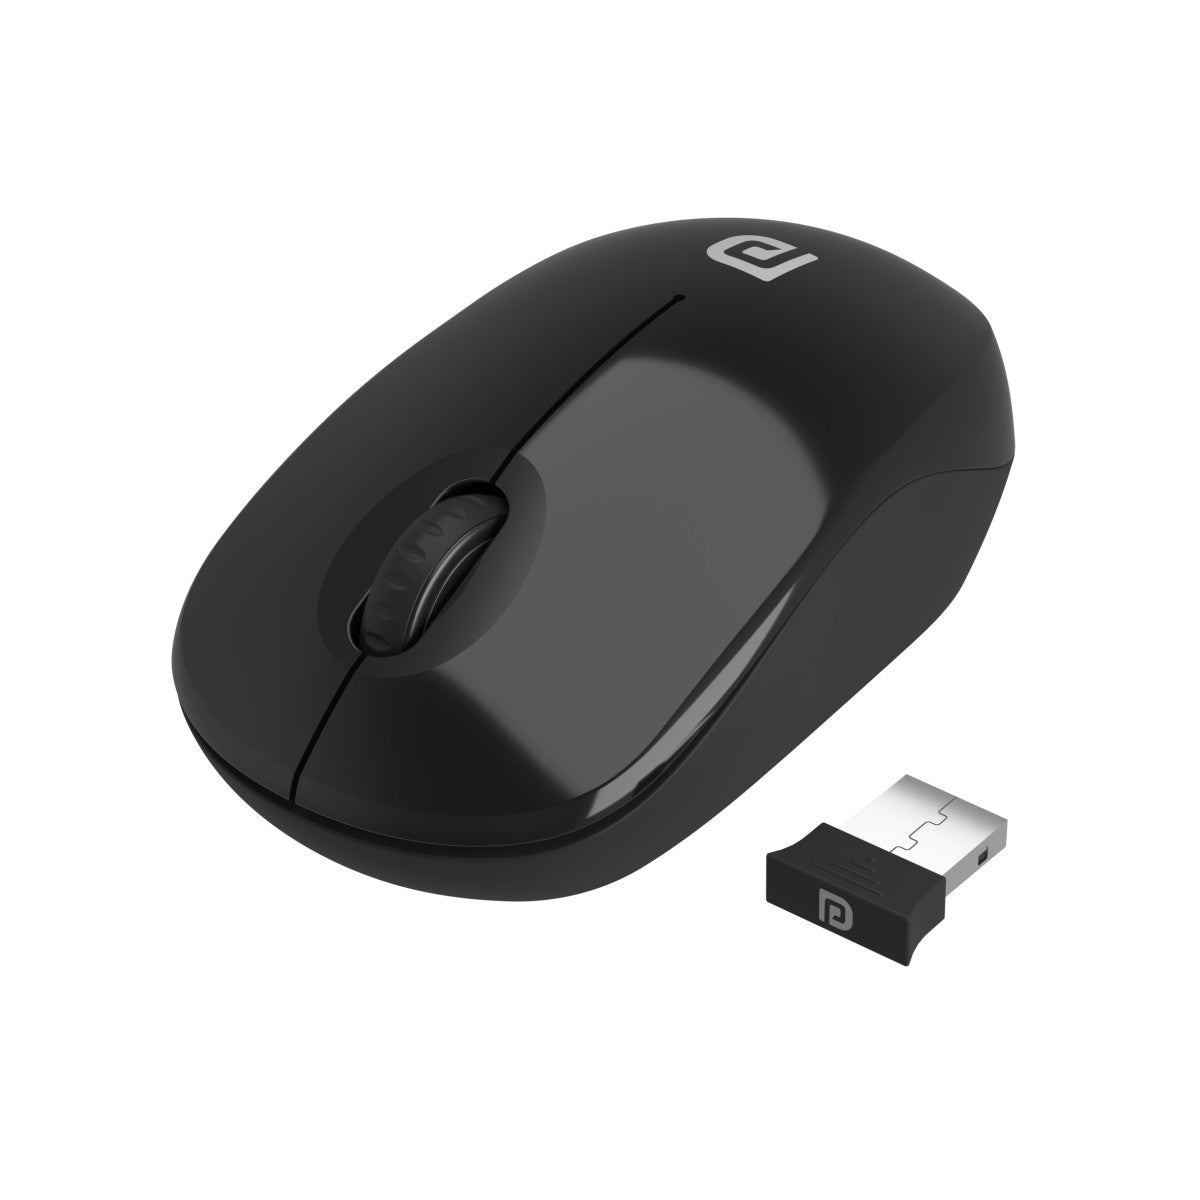 Buy Portronics Toad 12 Wireless Mouse working up to 33ft / 10m